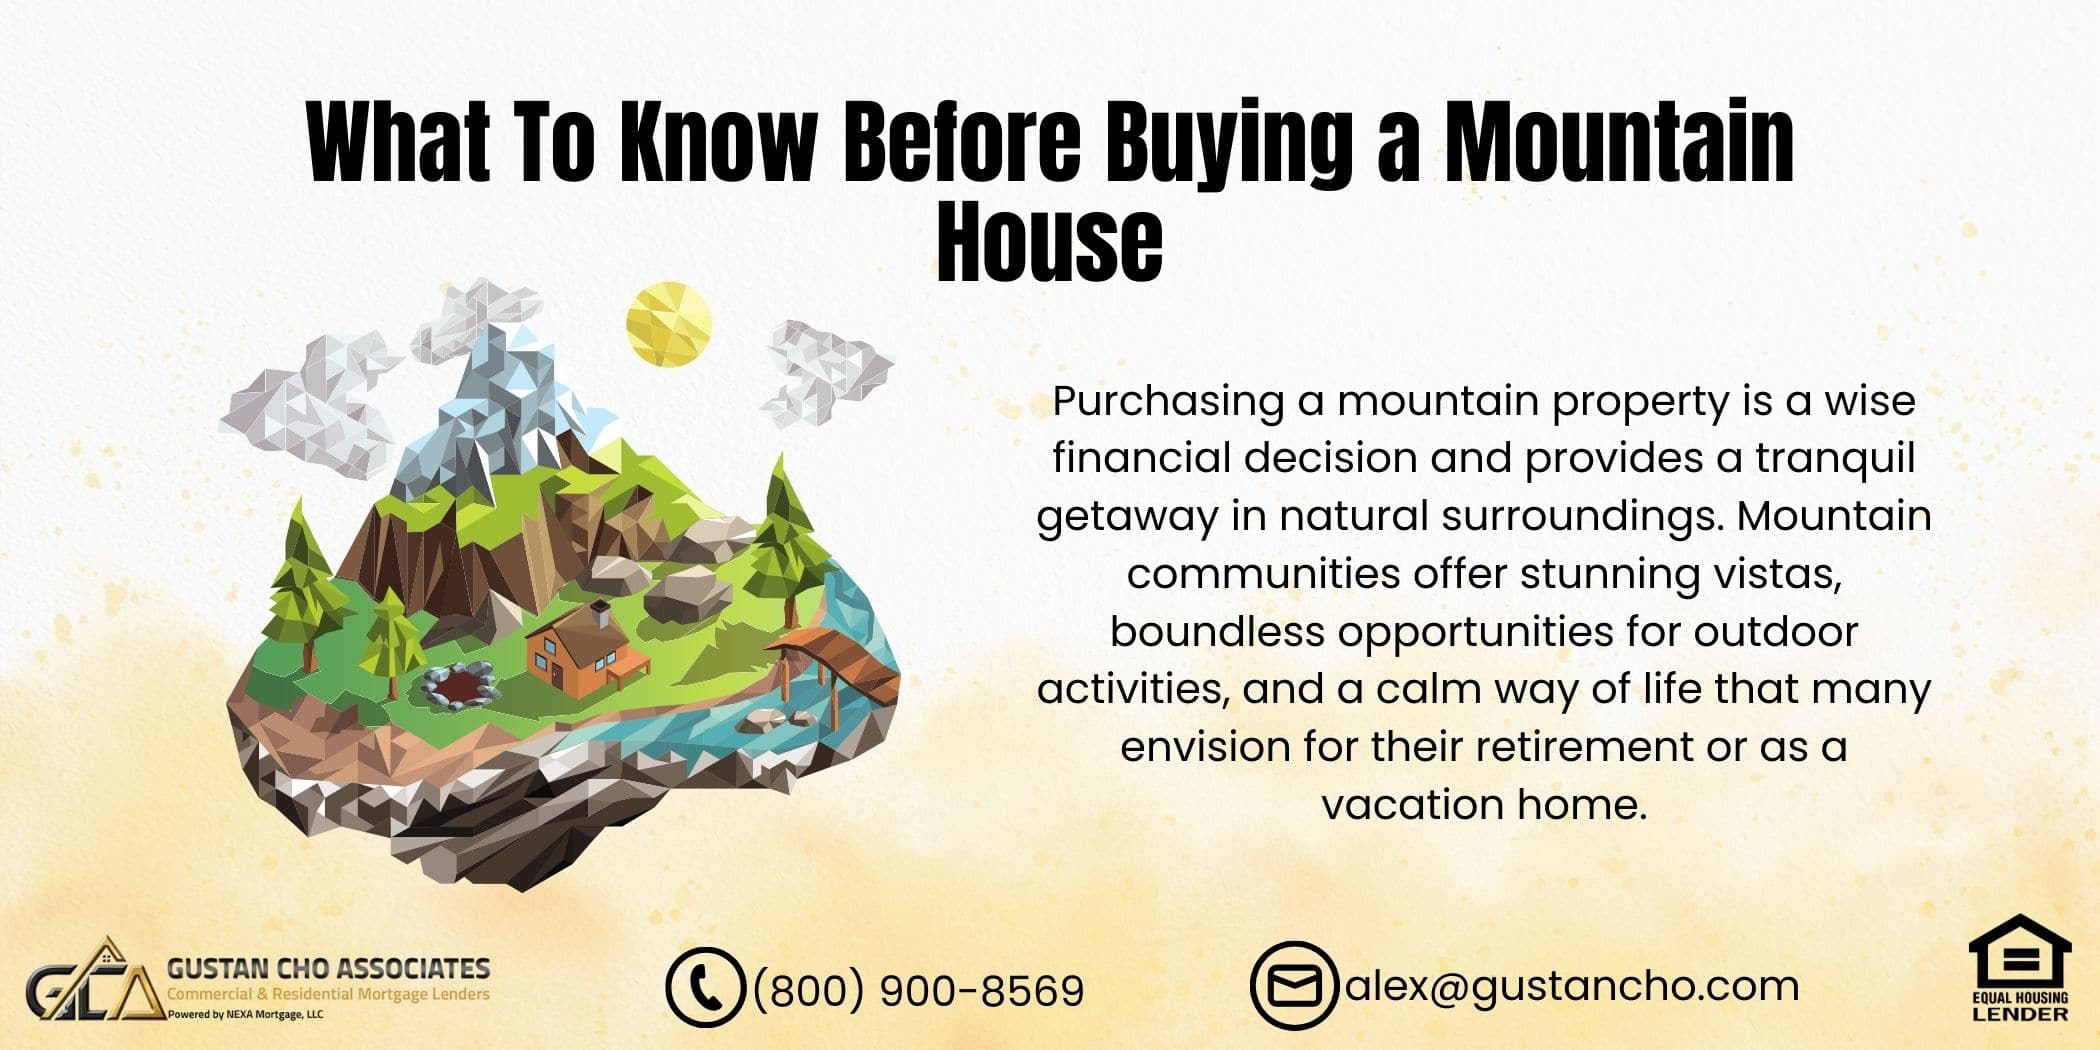 Buying a Mountain House